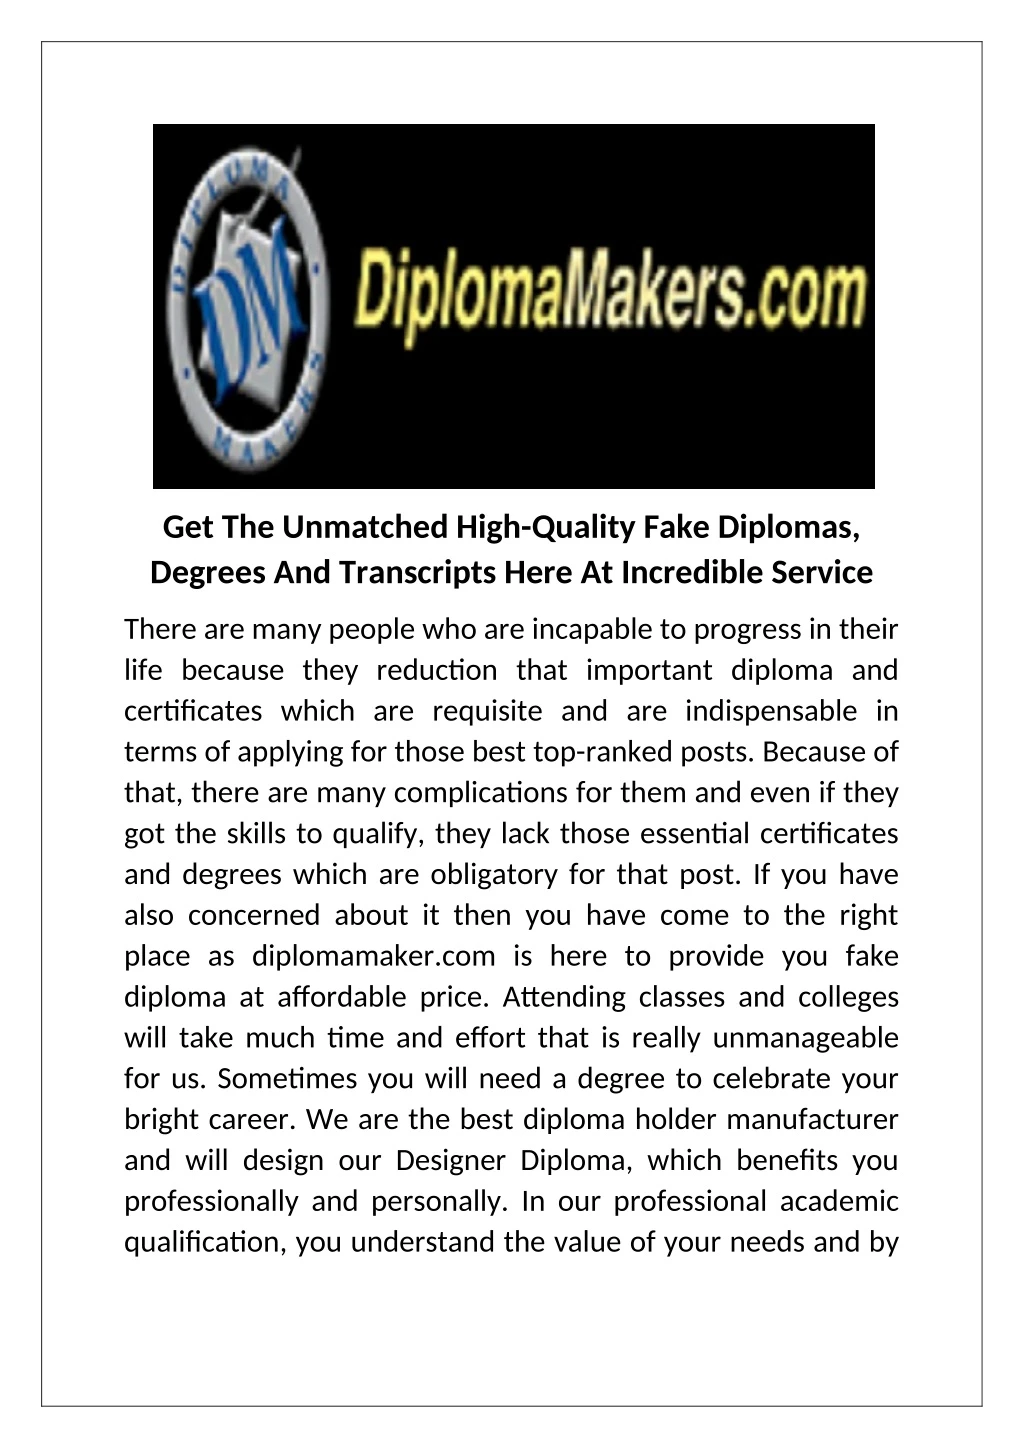 get the unmatched high quality fake diplomas